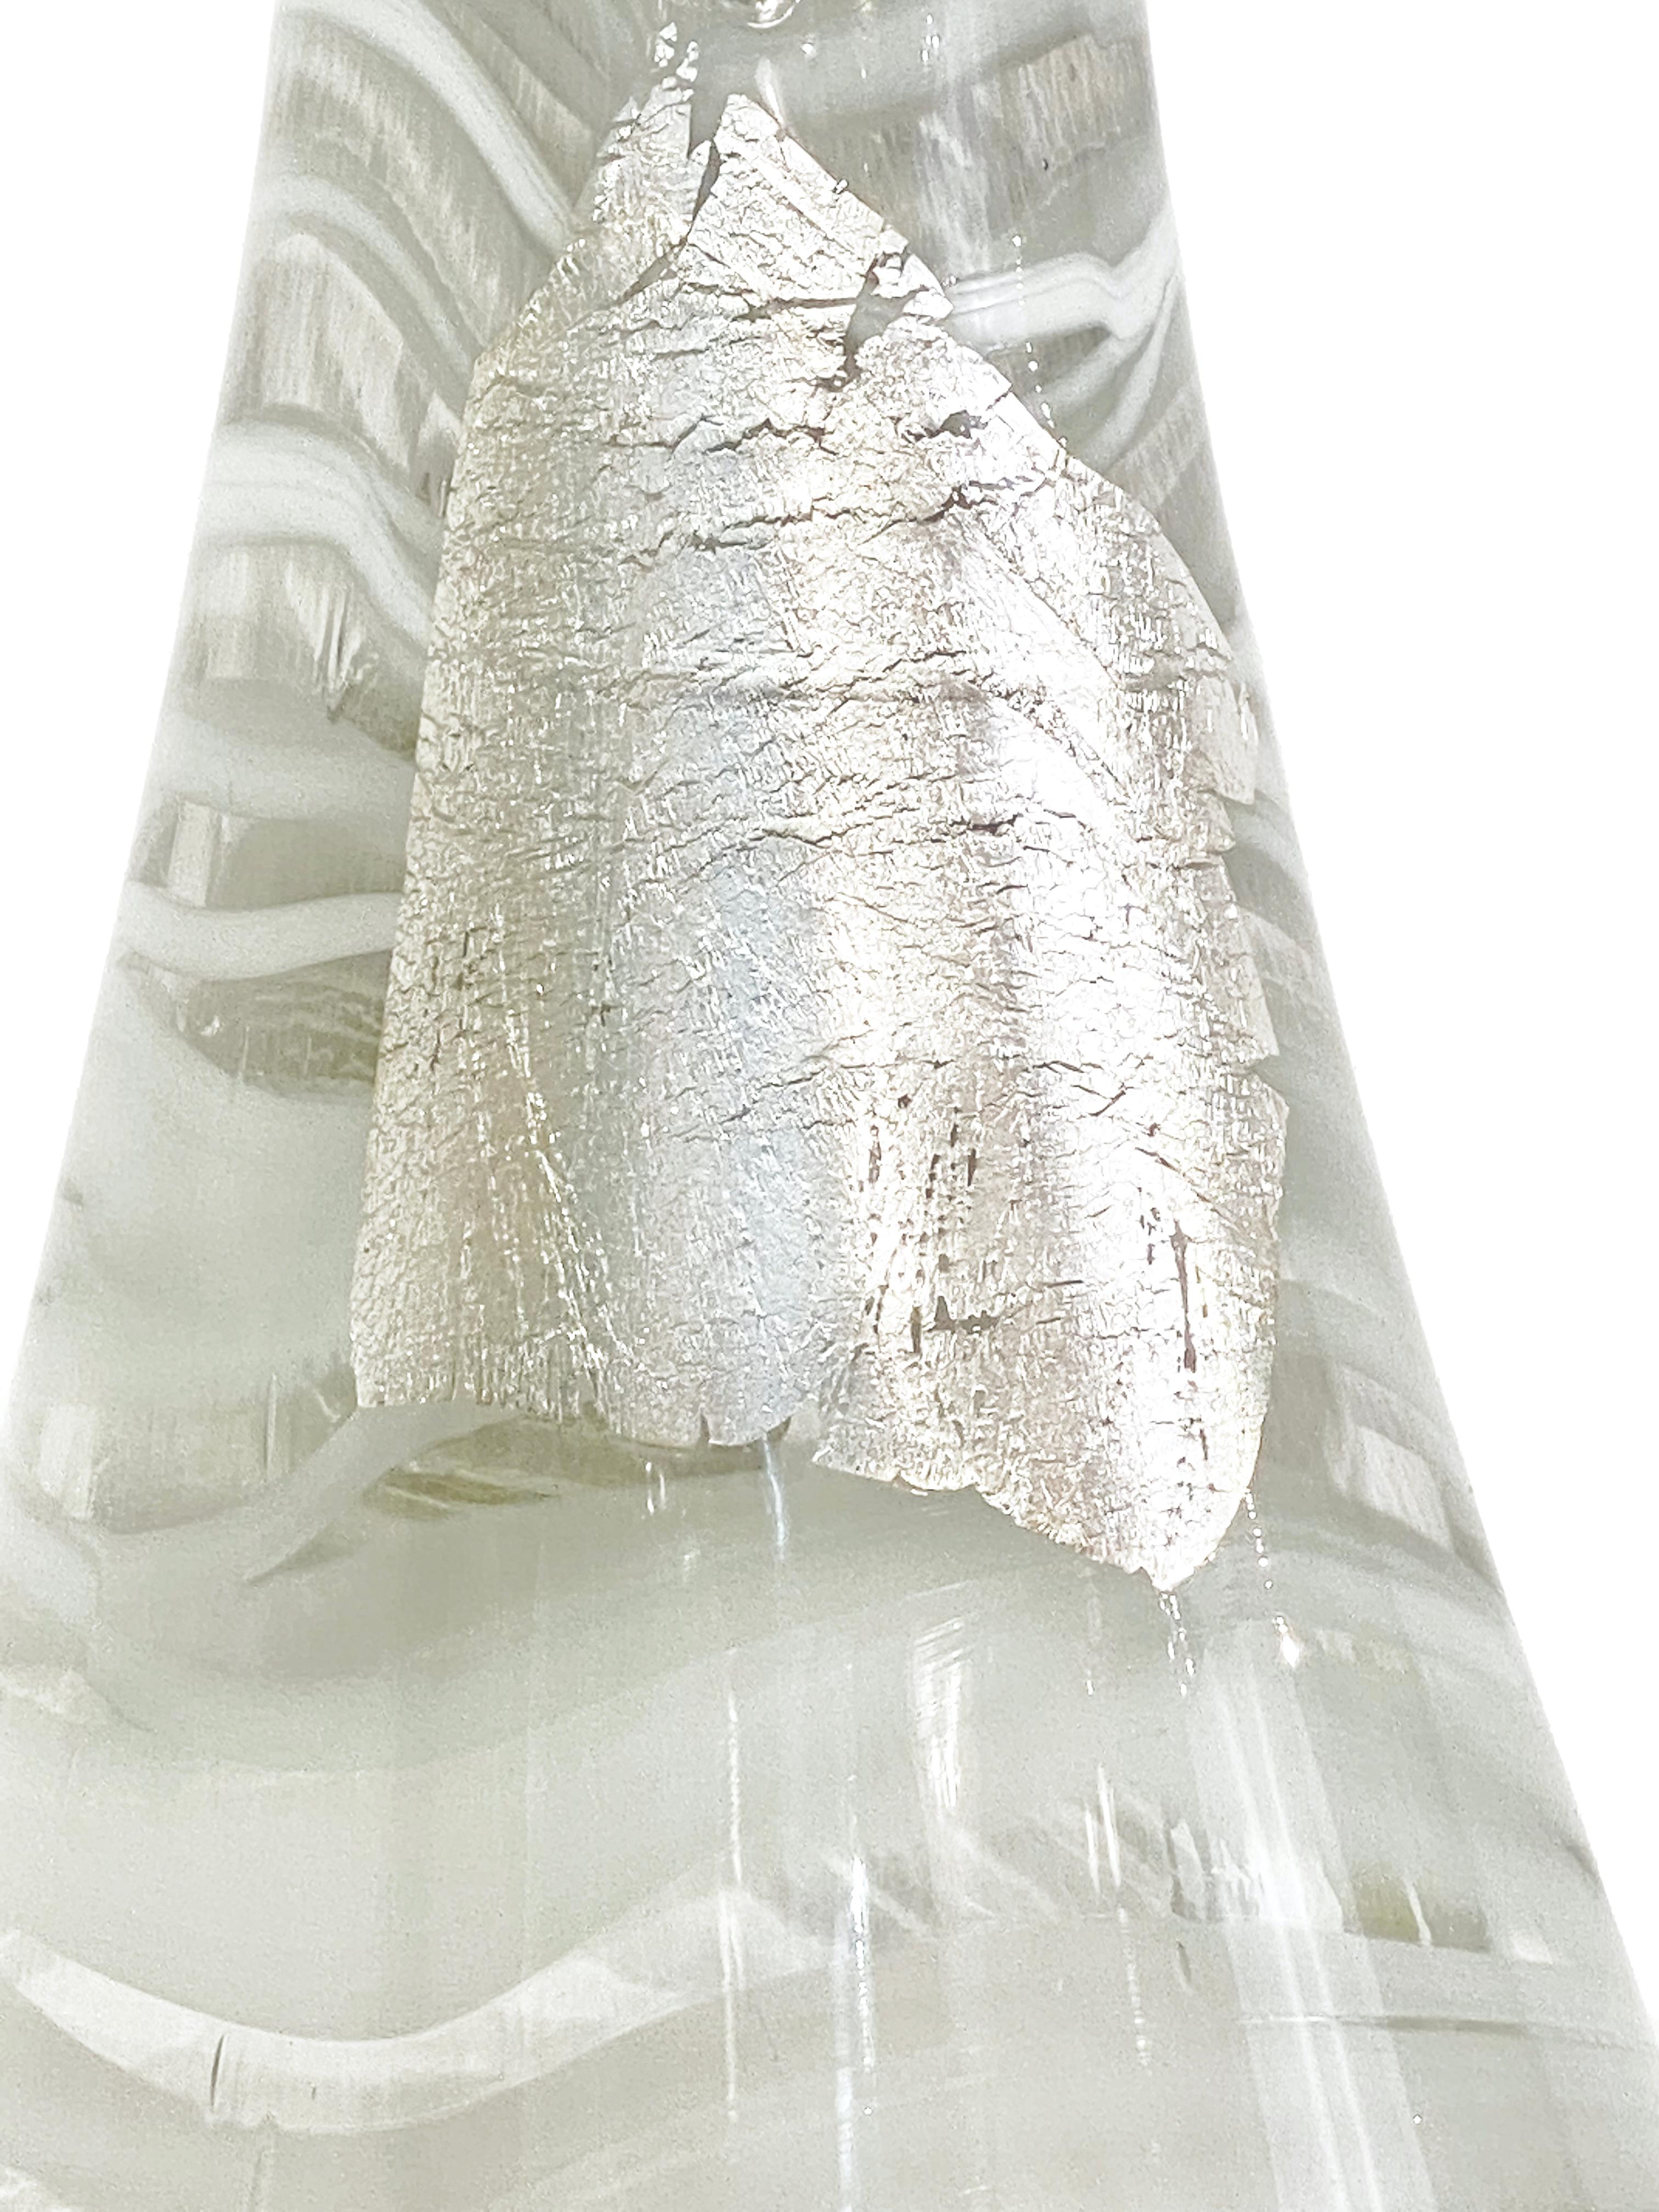 Italian Art Deco Style Silver Leaf White Clear Murano Glass Sculpture Vase For Sale 3